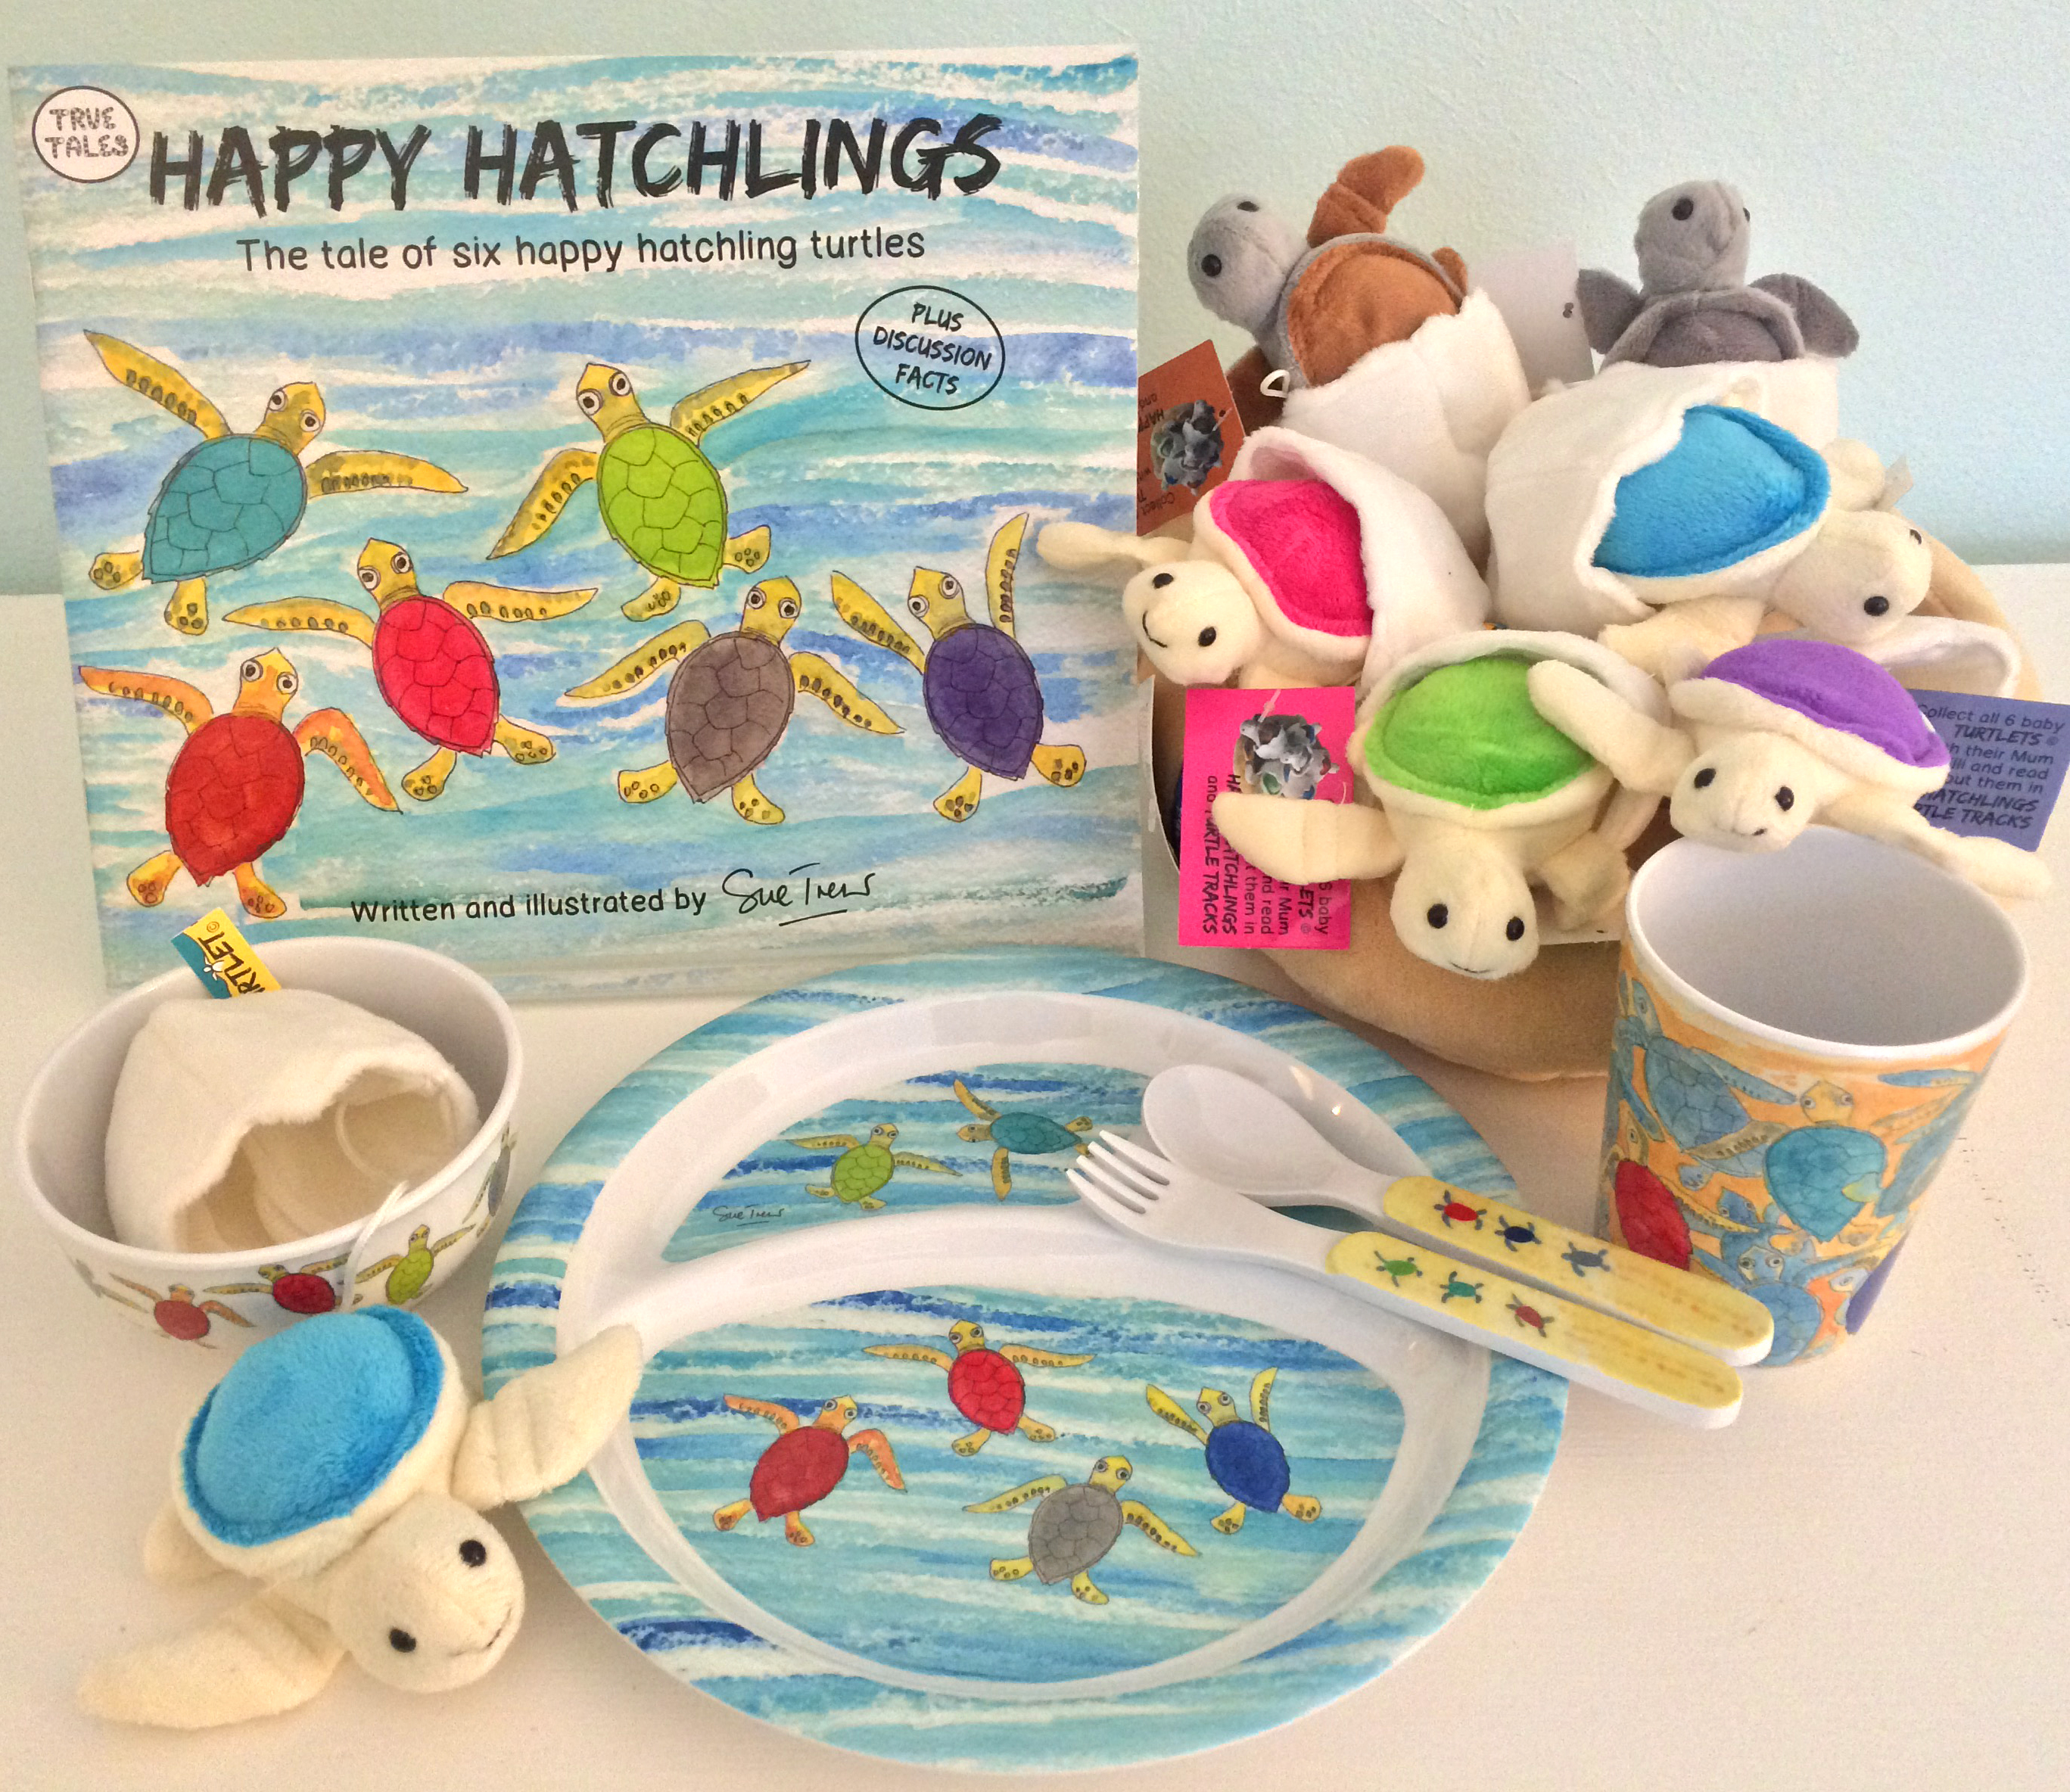 Sue Trew's second book Happy Hatchlings with a nest of hatchlings and matching melamine dinnerware.